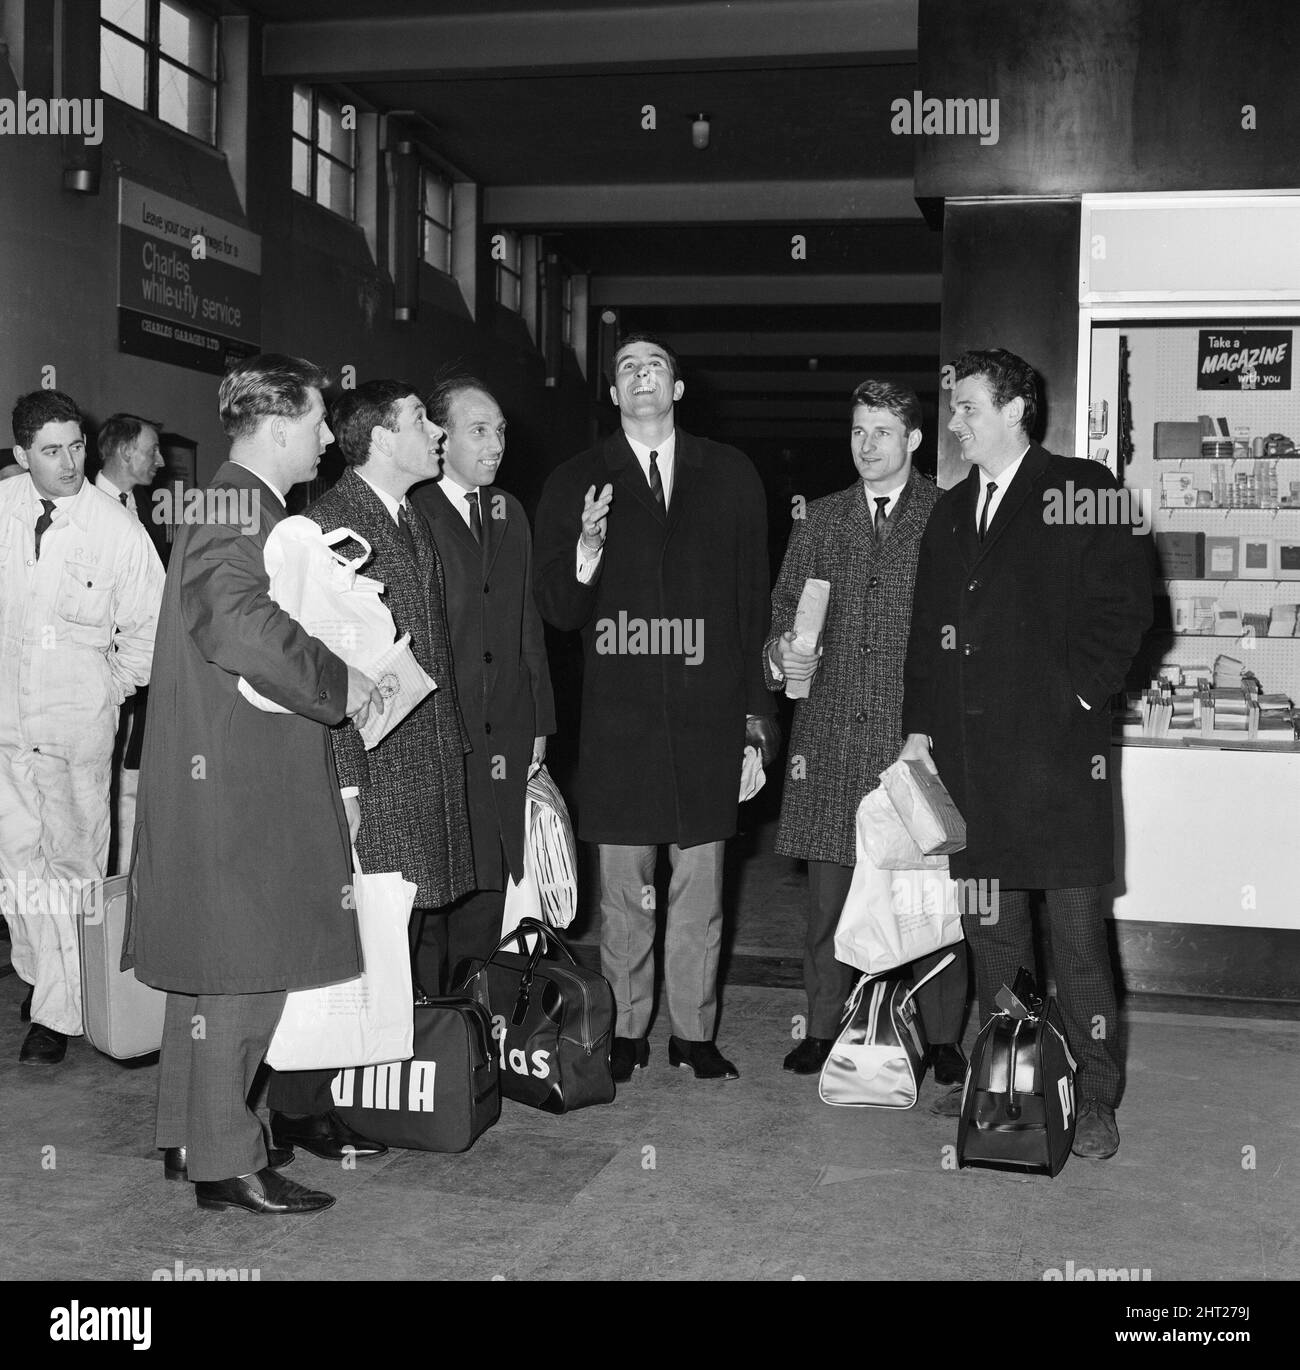 Liverpool captain Ron Yeats smiles as he flicks a coin into the air watched by fellow players following their arrival at Speke Airport from Cologne.From left to right: Gordon Milne, Ian Callaghan, Ronnie Moran, Yeats, Roger Hunt and ommy Lawrence. 25th March 1965. Stock Photo